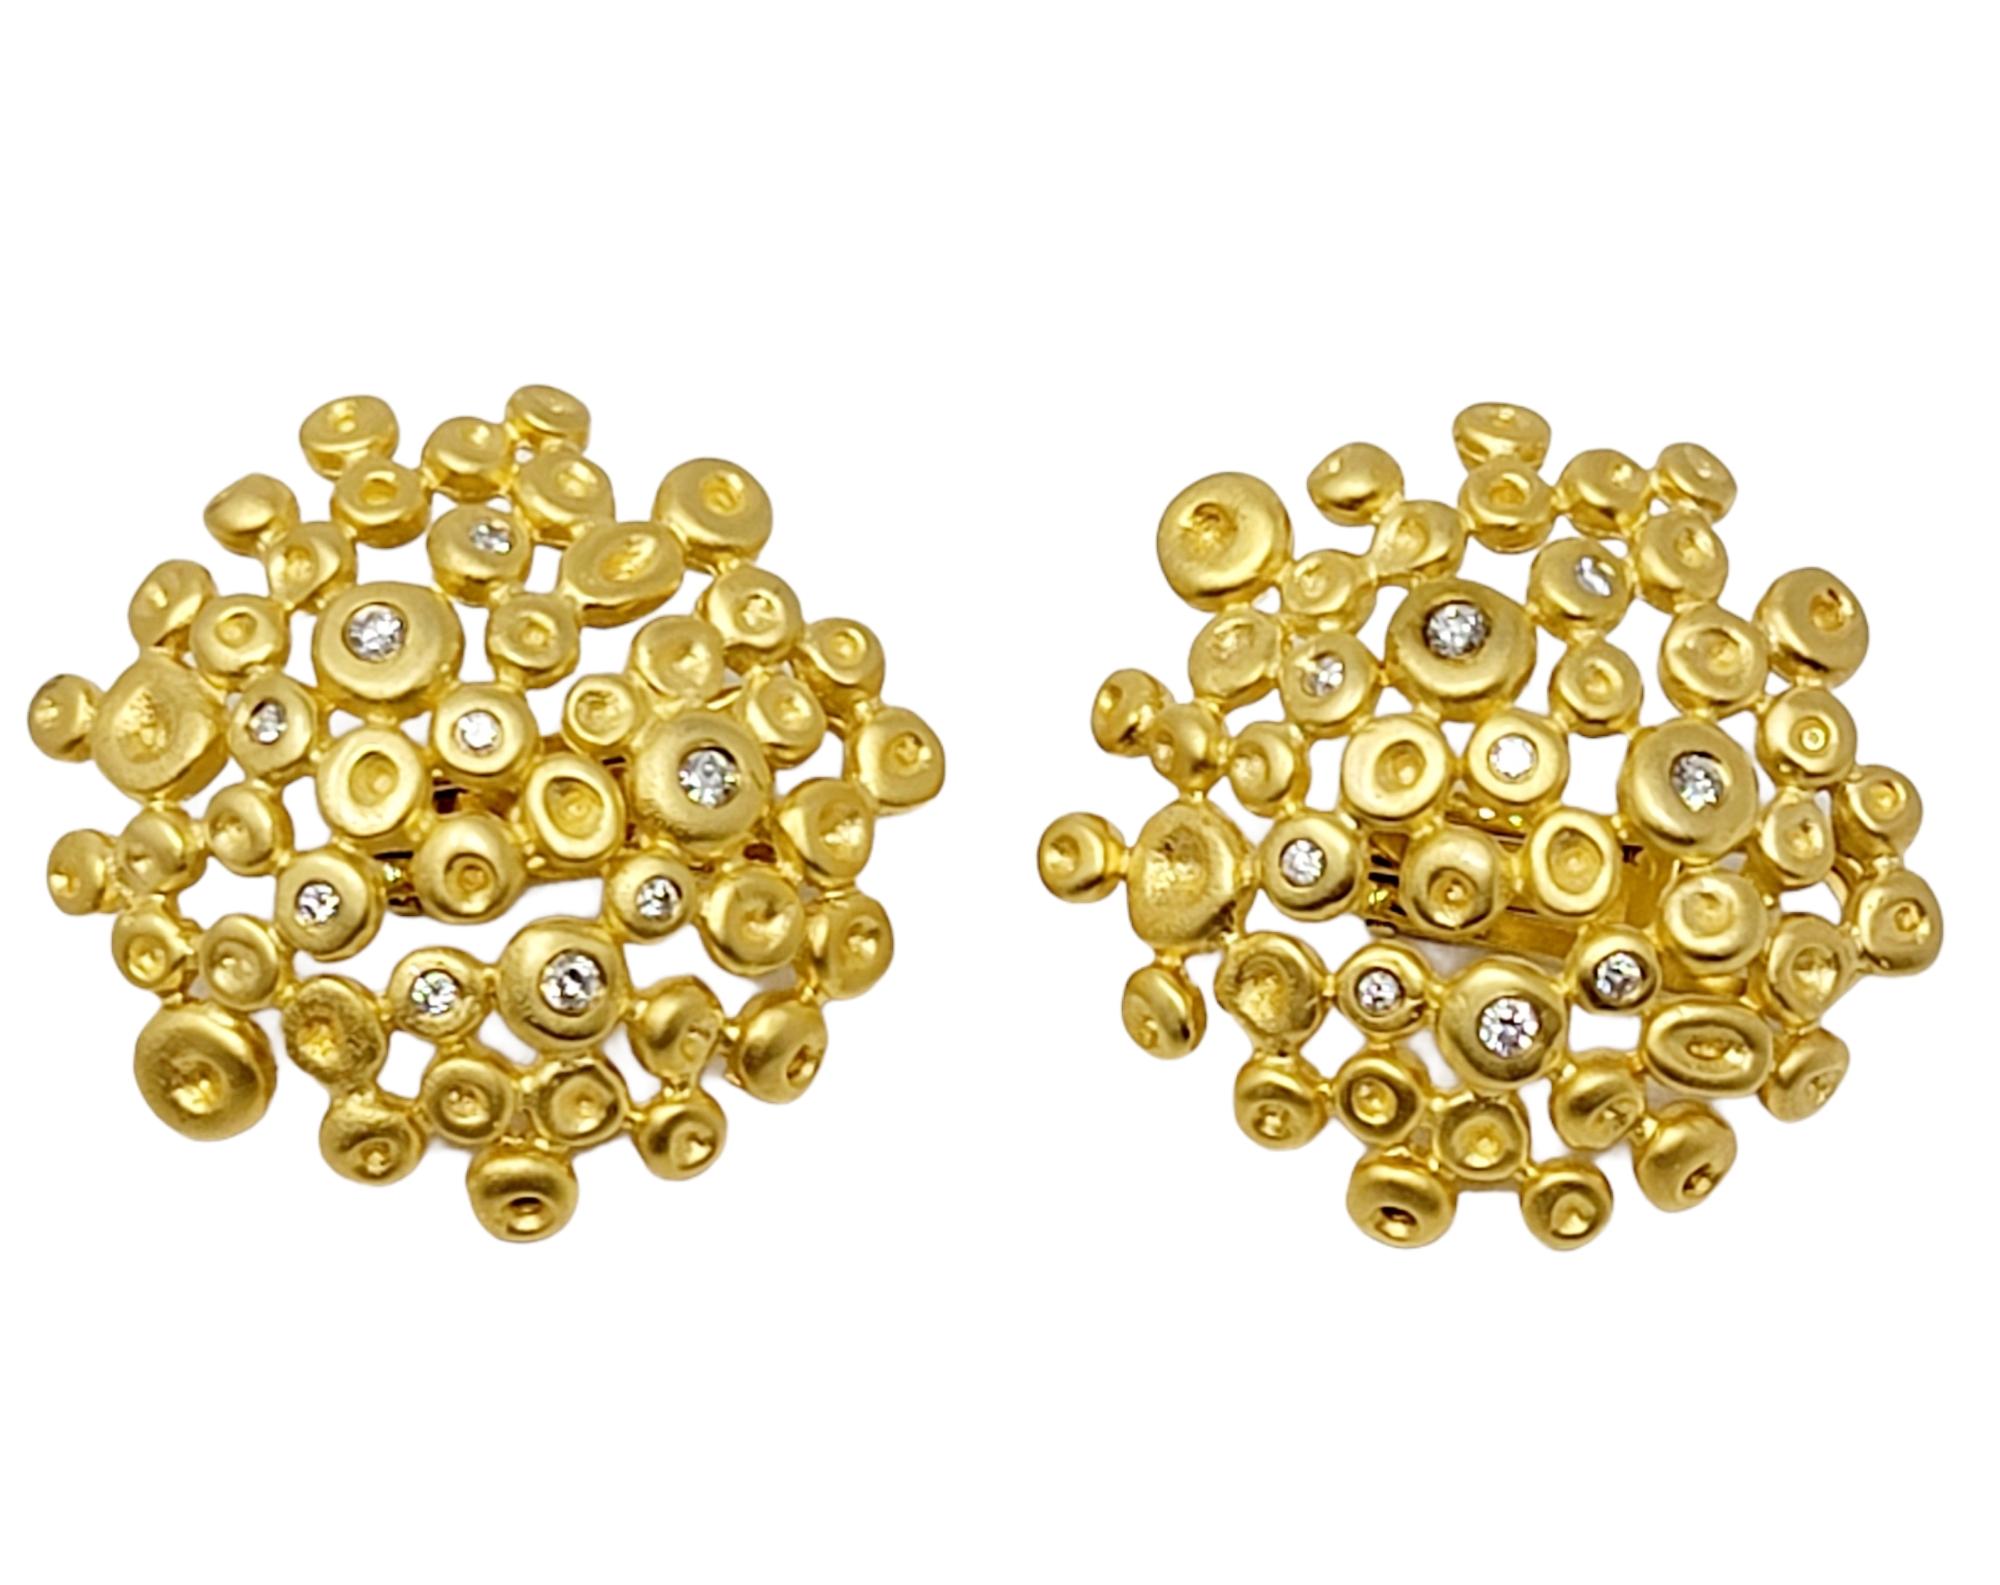 These chic earrings exude modern elegance. The stunning brushed gold design accented with twinkling diamonds will be your new go-to pair! The earrings feature a collection of matte finished 18 karat yellow gold 'bubbles